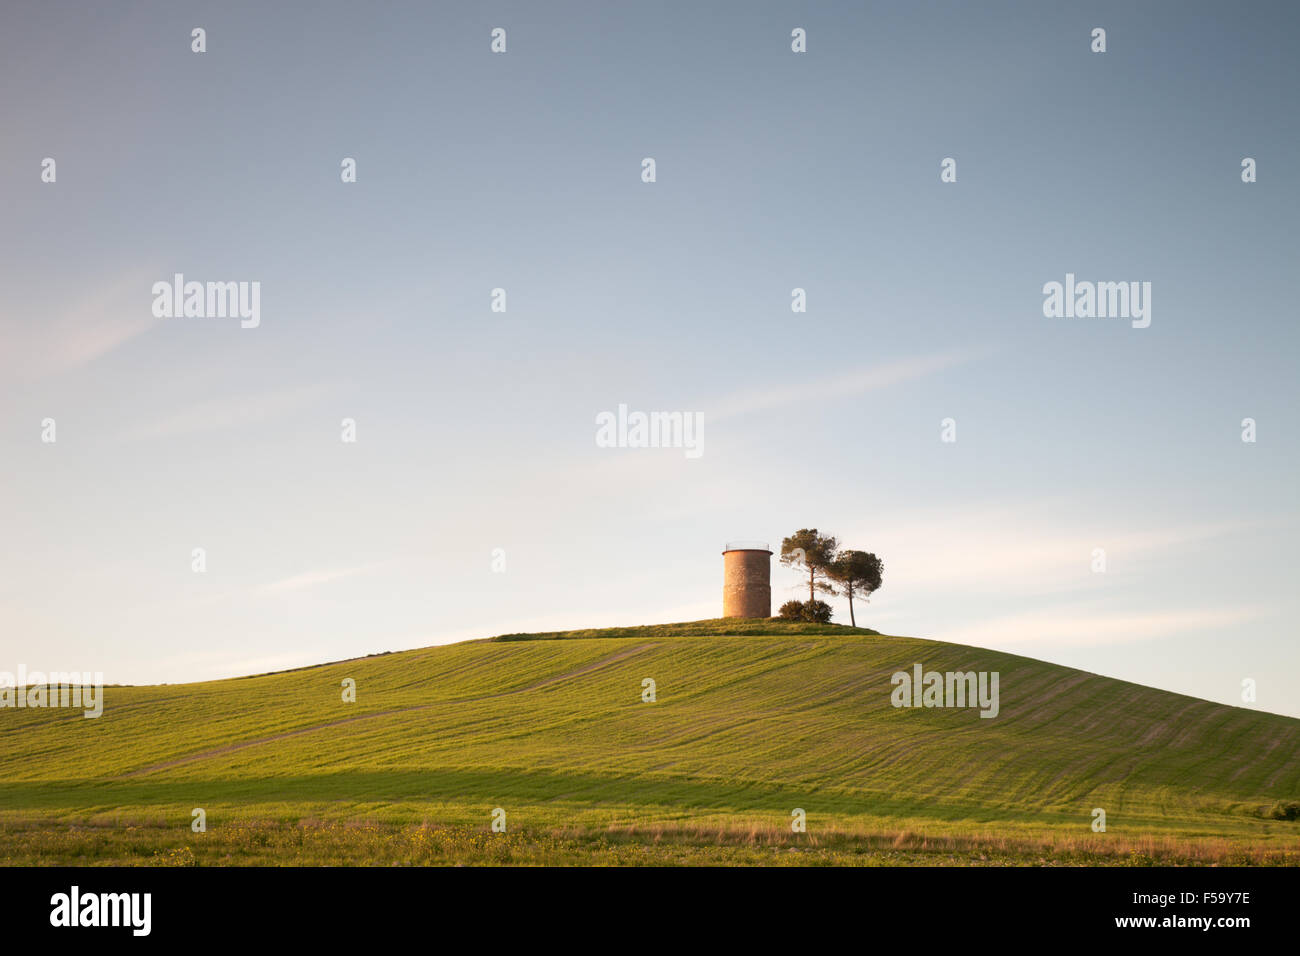 Tuscany: typical countryside landscape with rolling hills, trees and rural tower. Stock Photo